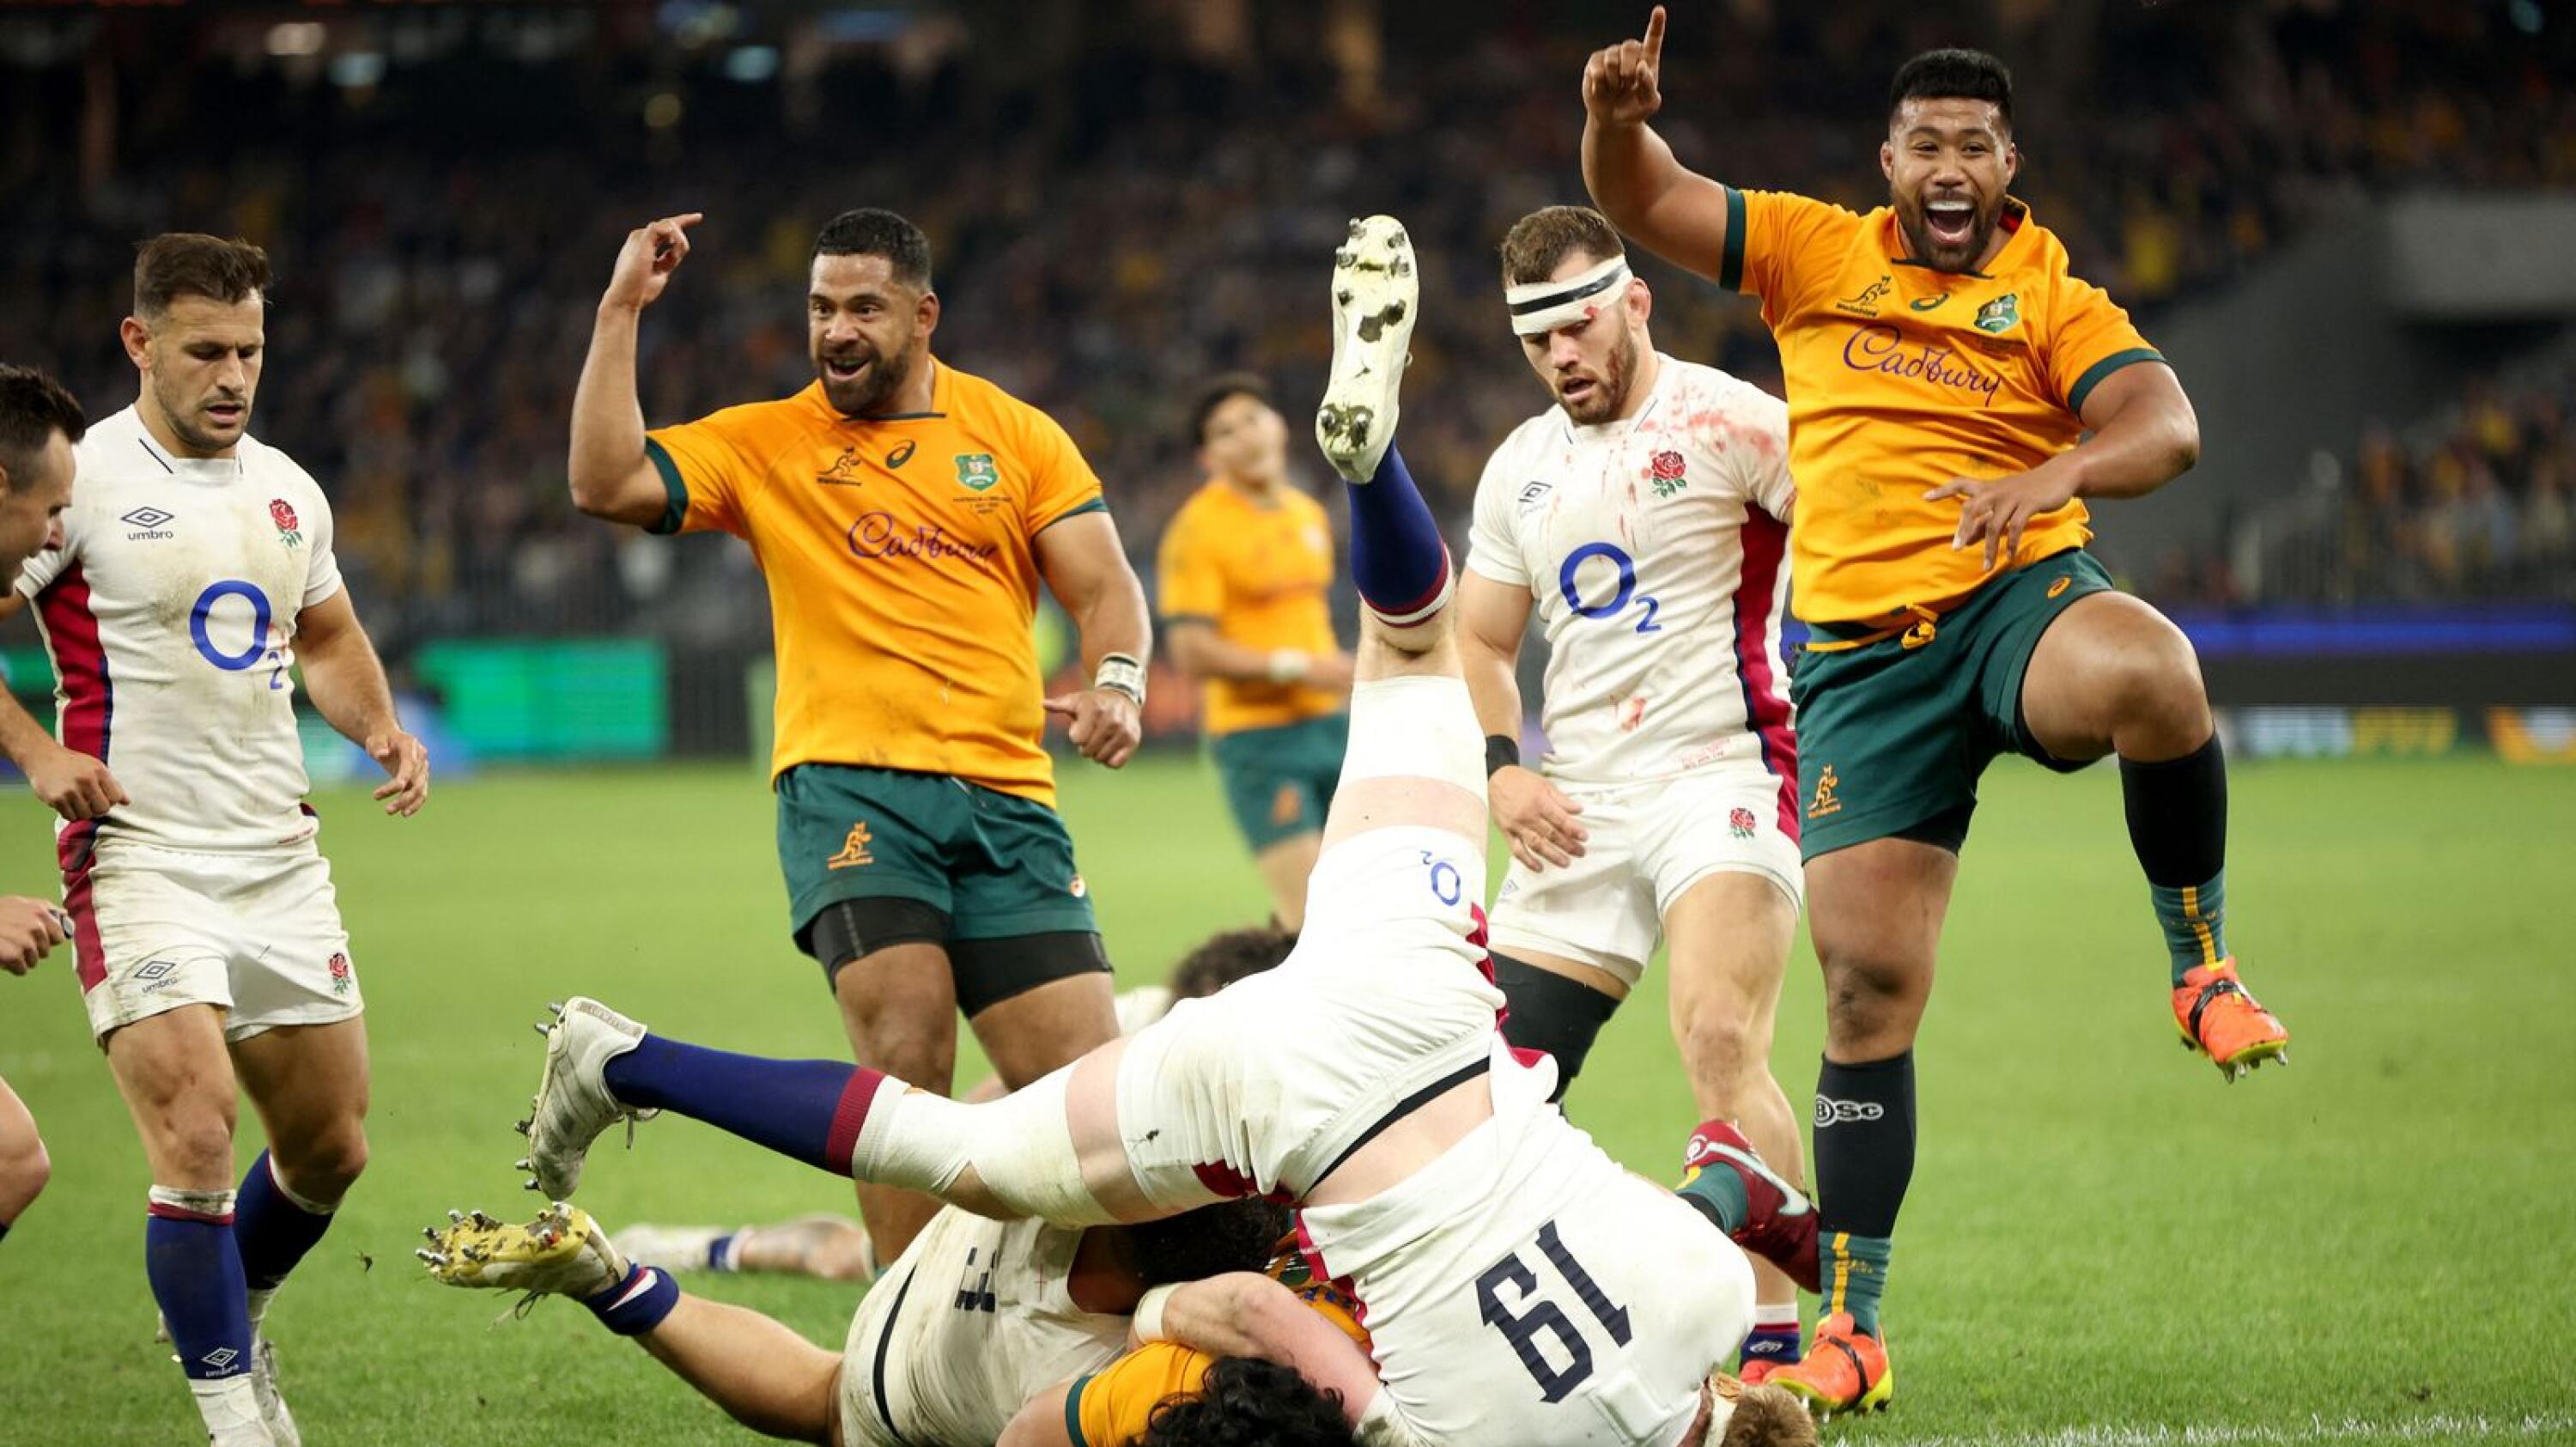 Folau Fainga’a (R) of Australia celebrates as a try is scored during the rugby test match against England at the Optus Stadium in Perth on Saturday